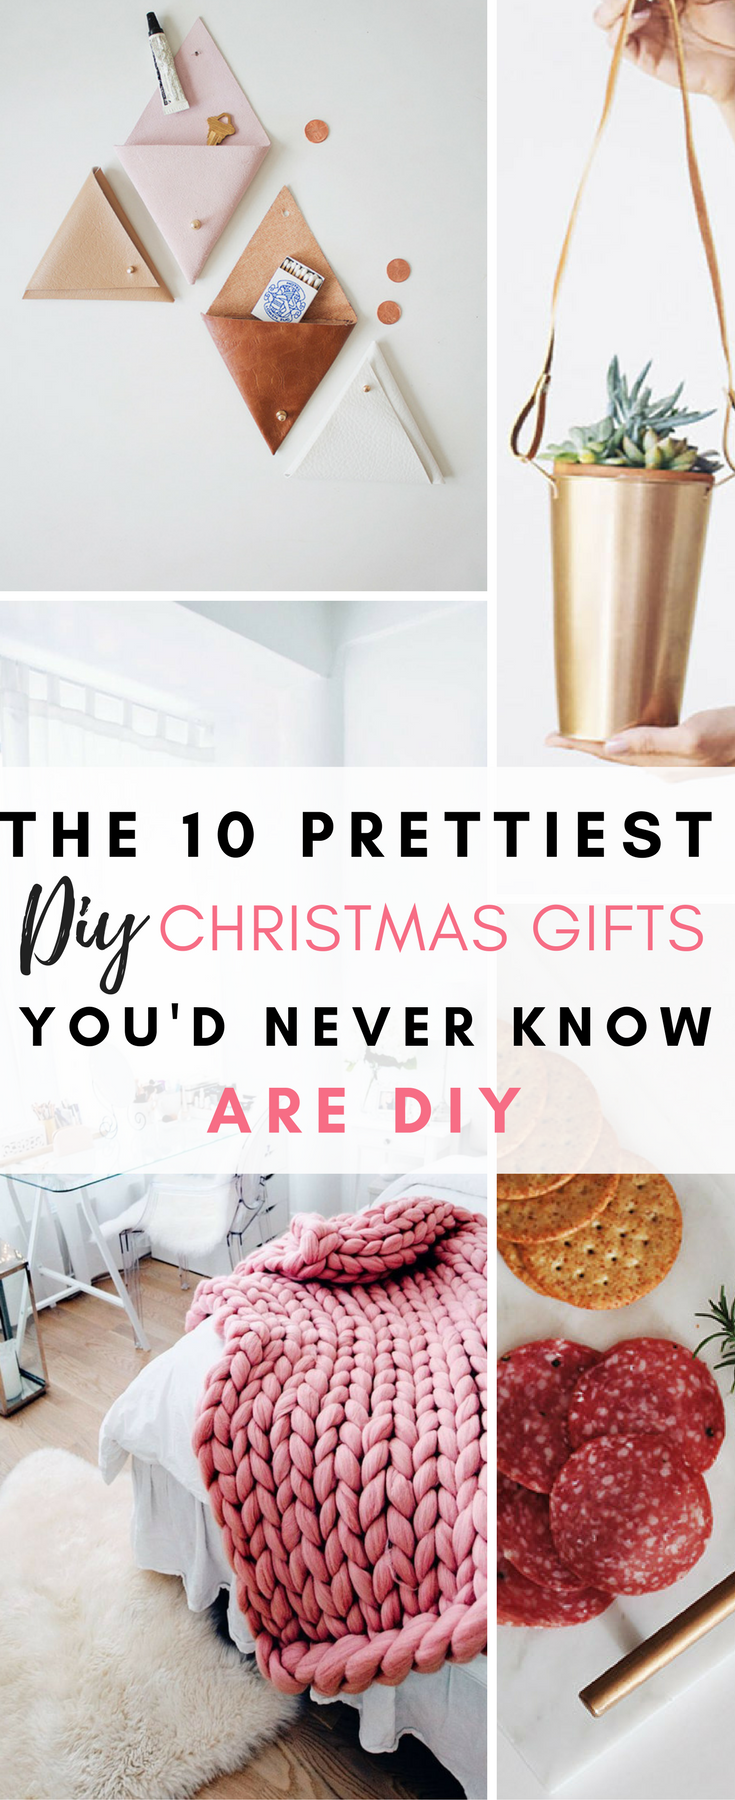 The 10 Prettiest DIY Gifts You'd Never Know Are DIY -   19 best diy Gifts ideas